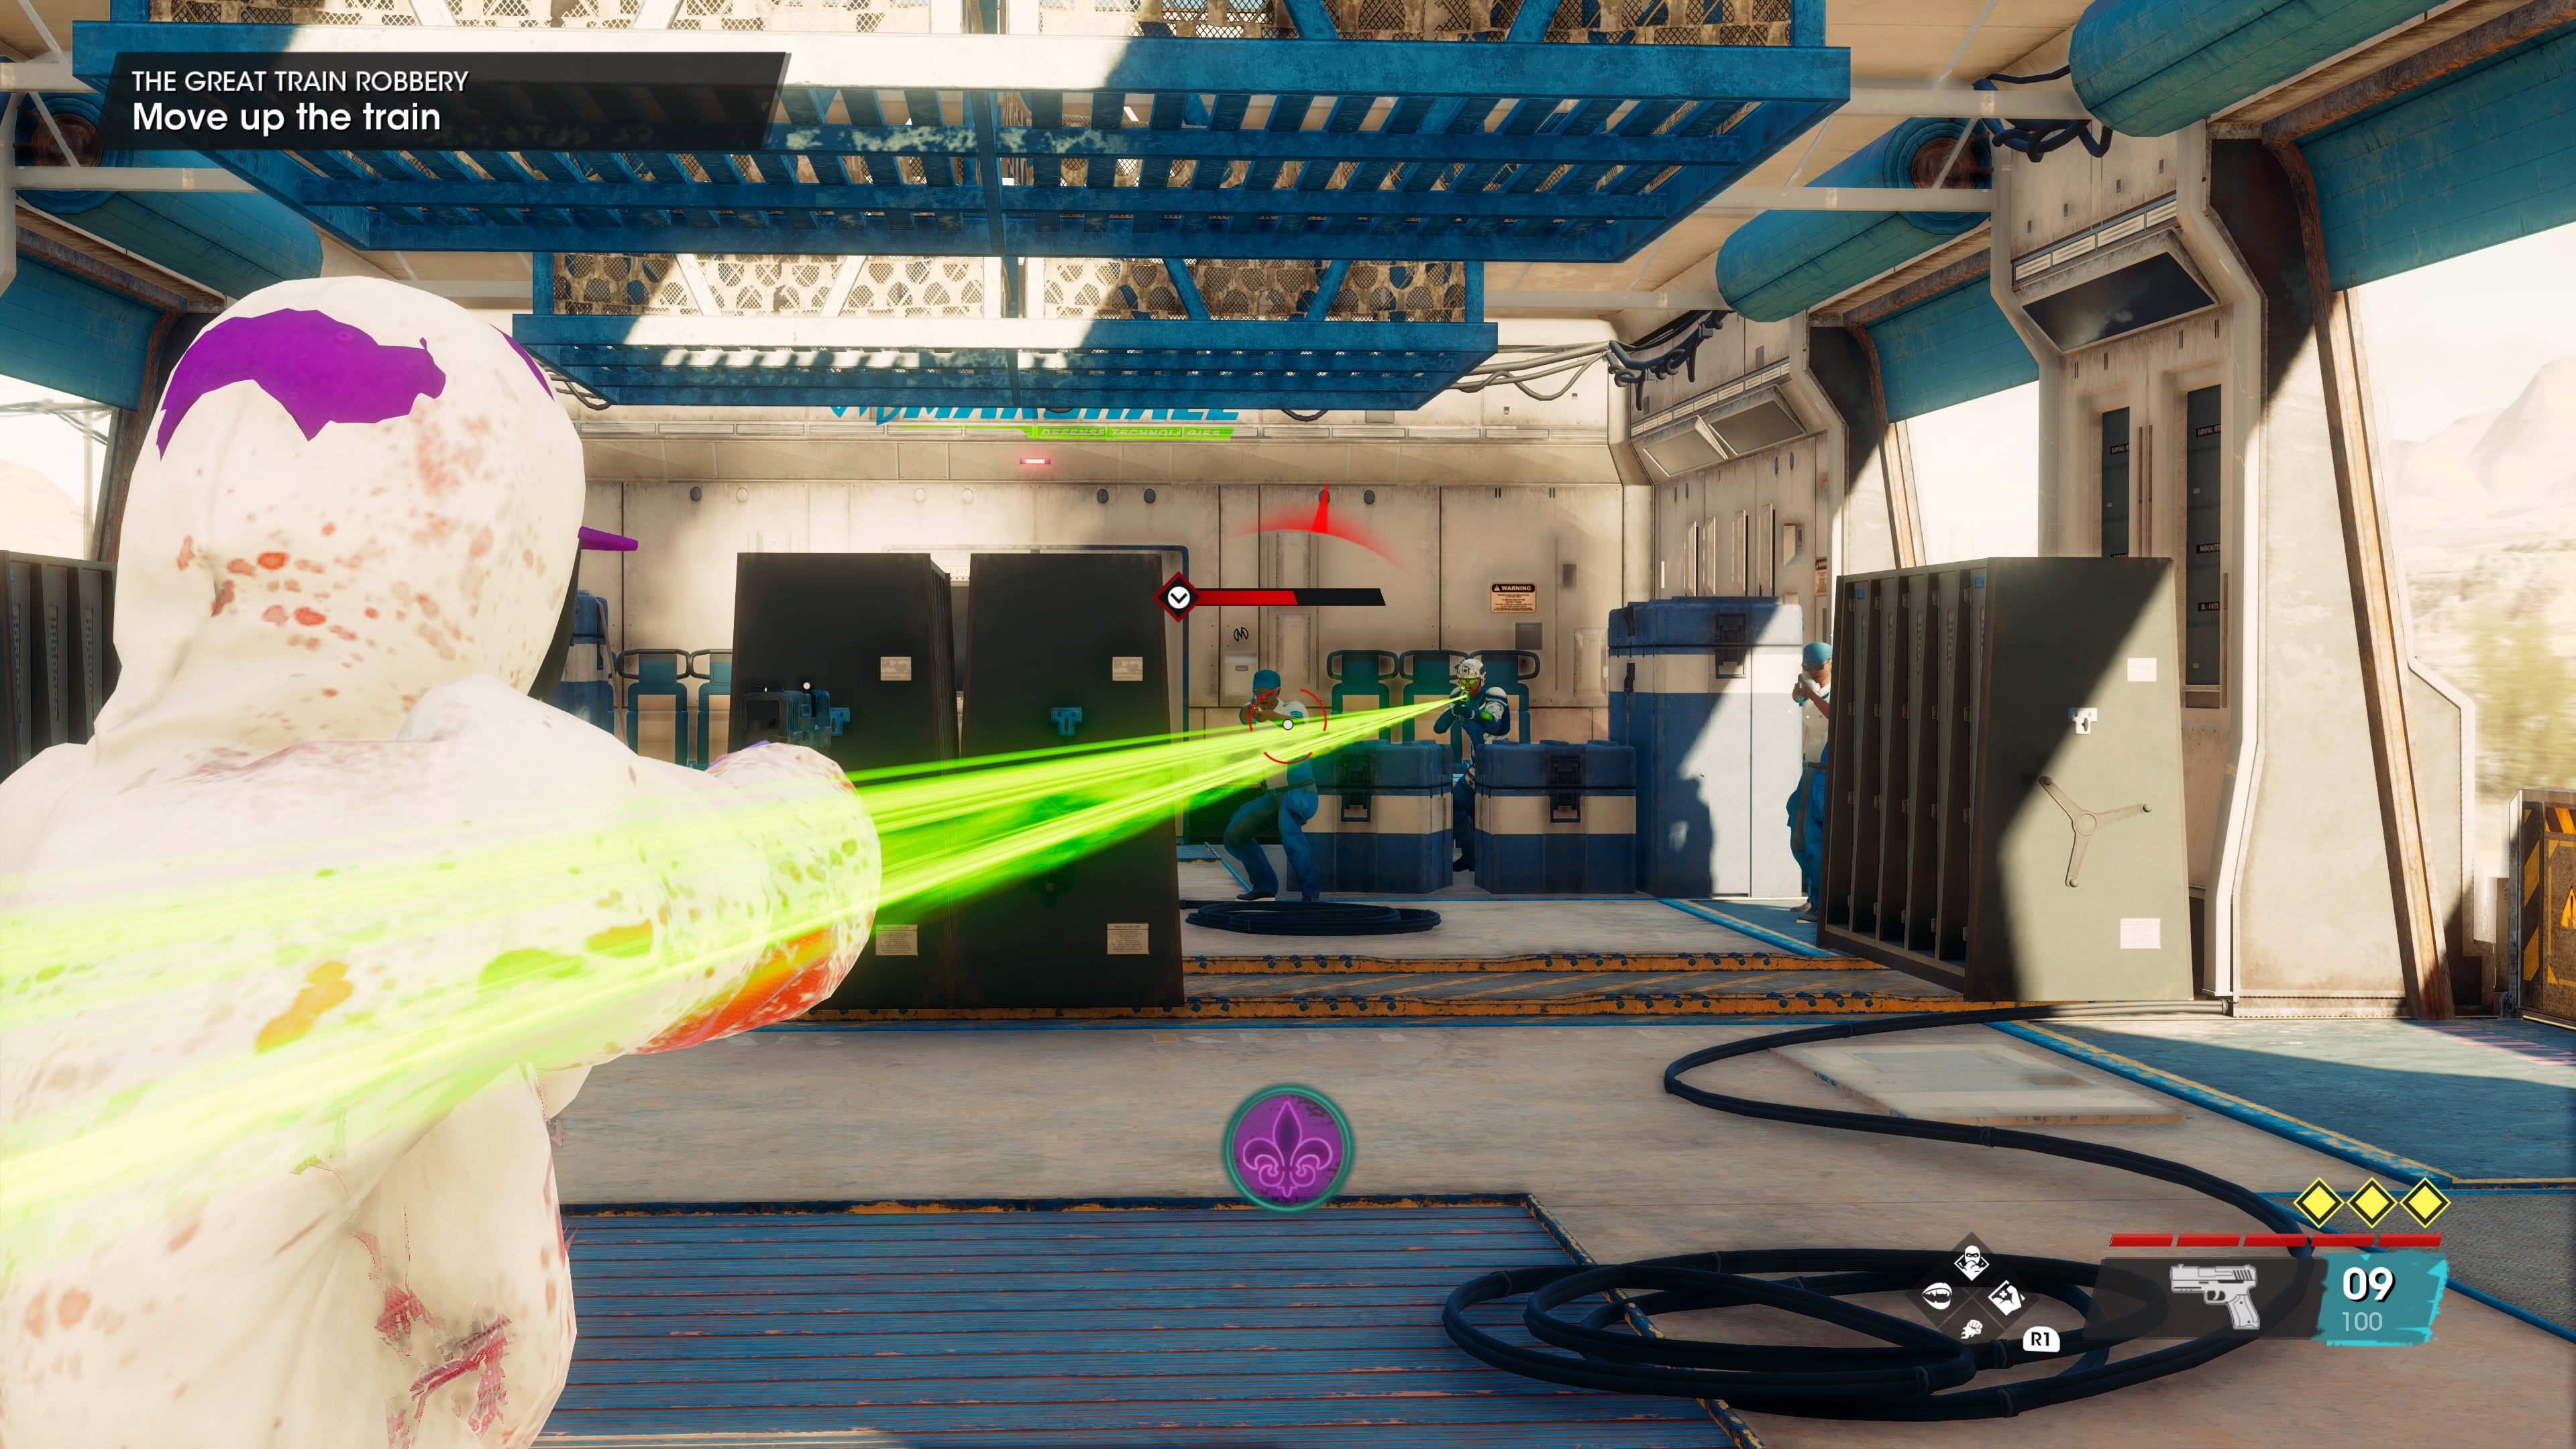 Saints Row review - over the shoulder combat inside a train, getting shot at with a green laser